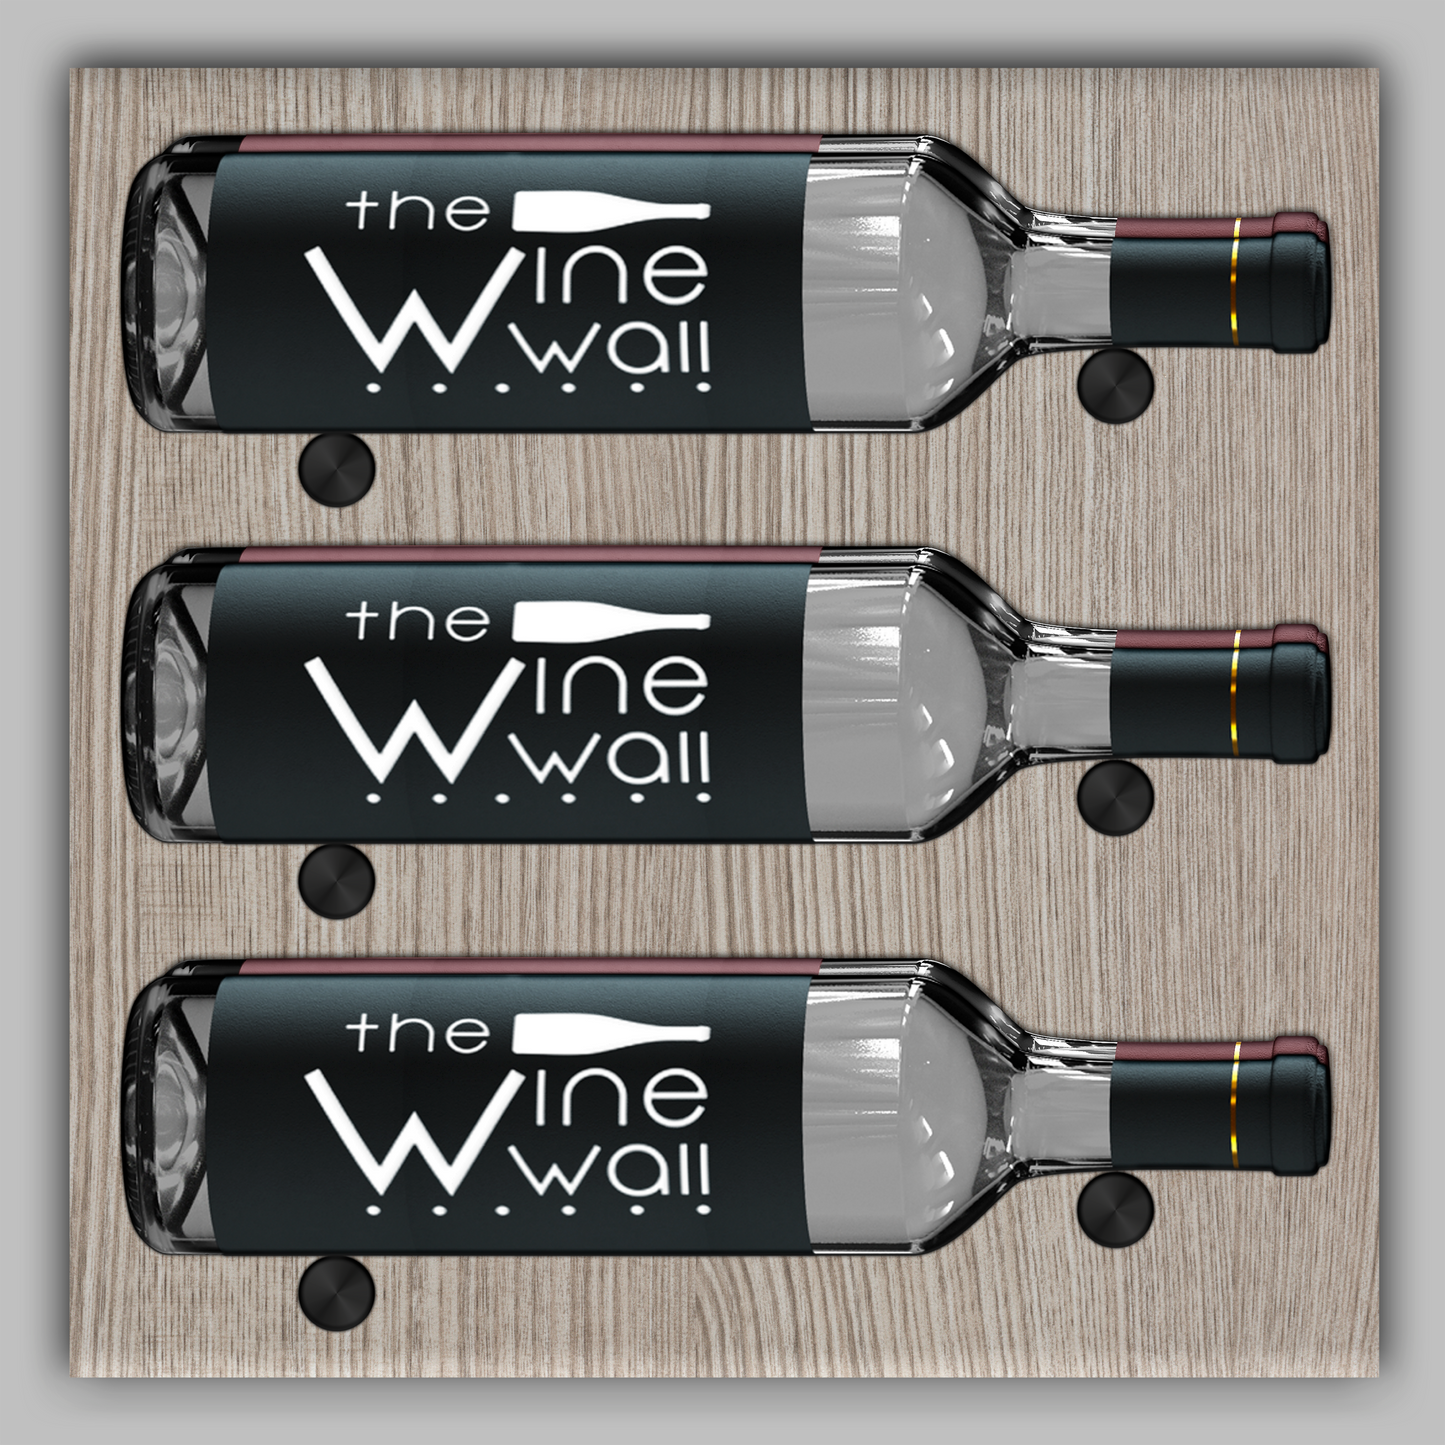 Wood Wine Wall Tile - 6 Bottles Label Out